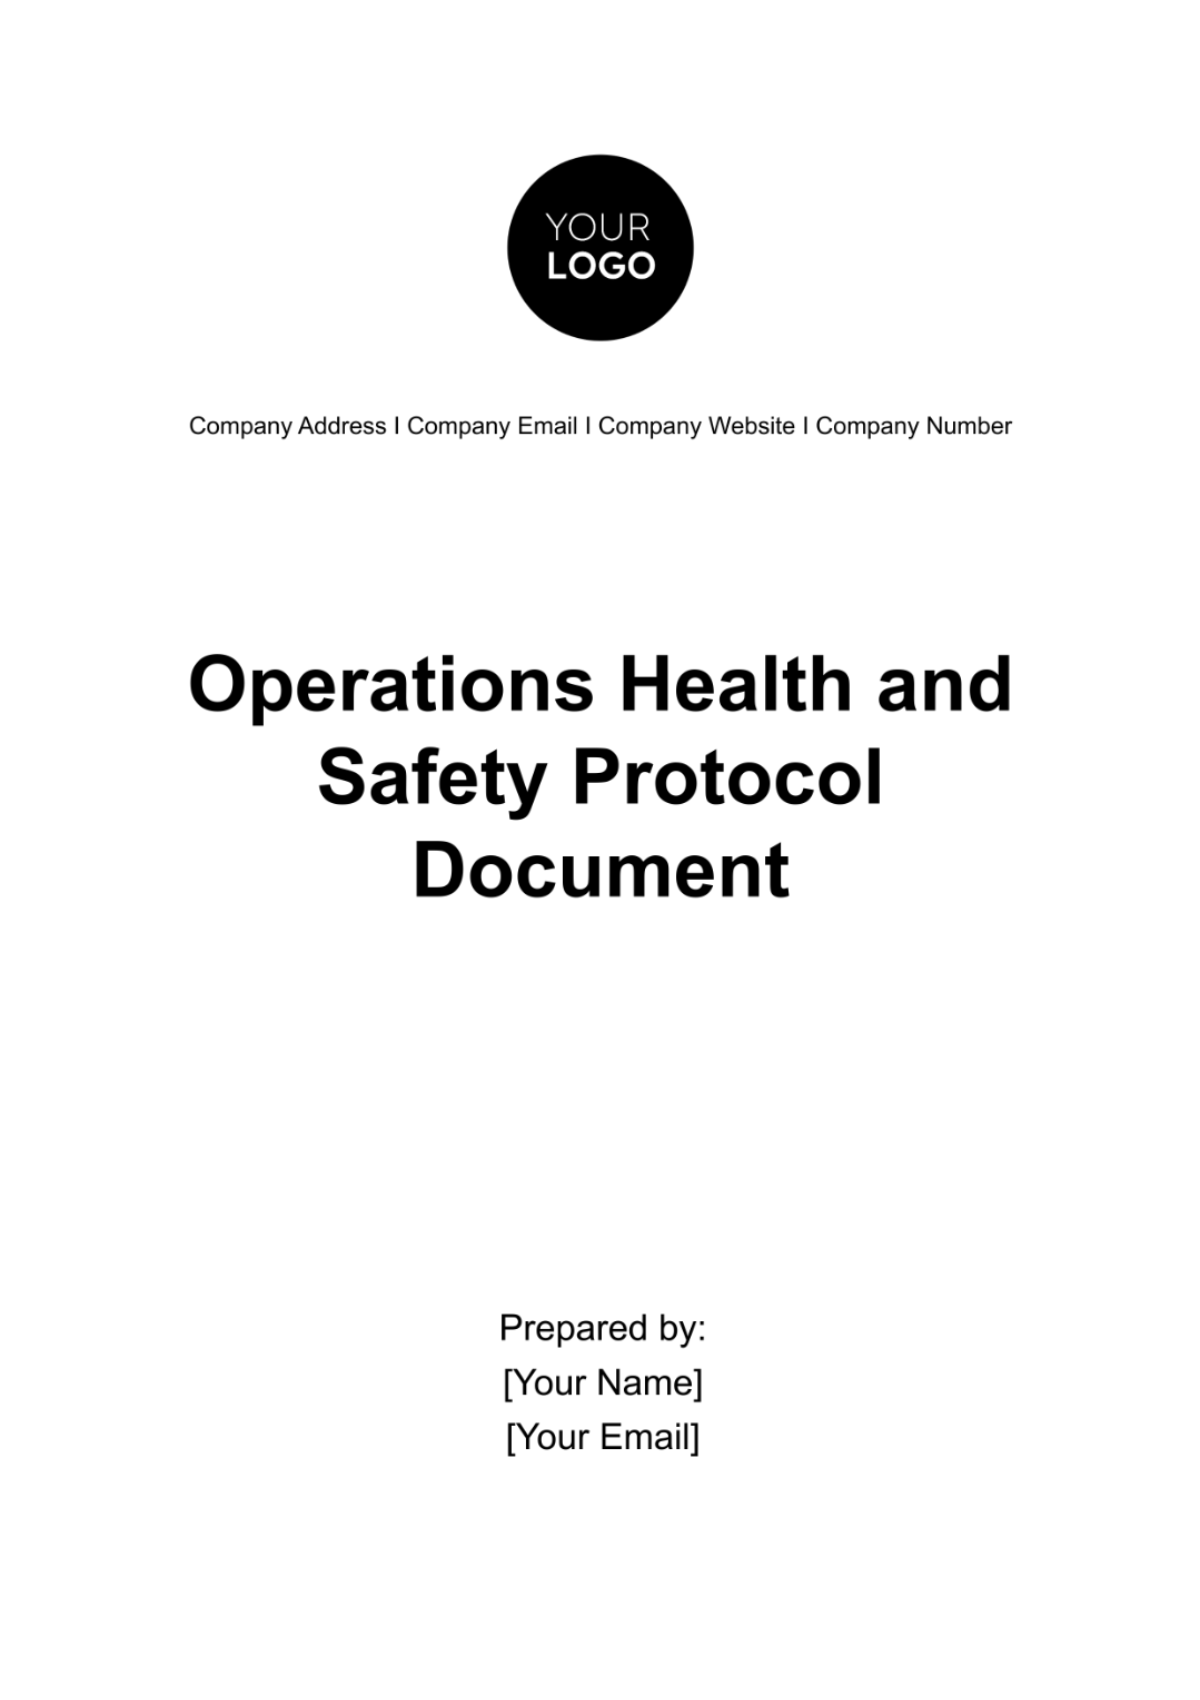 Operations Health and Safety Protocol Document Template